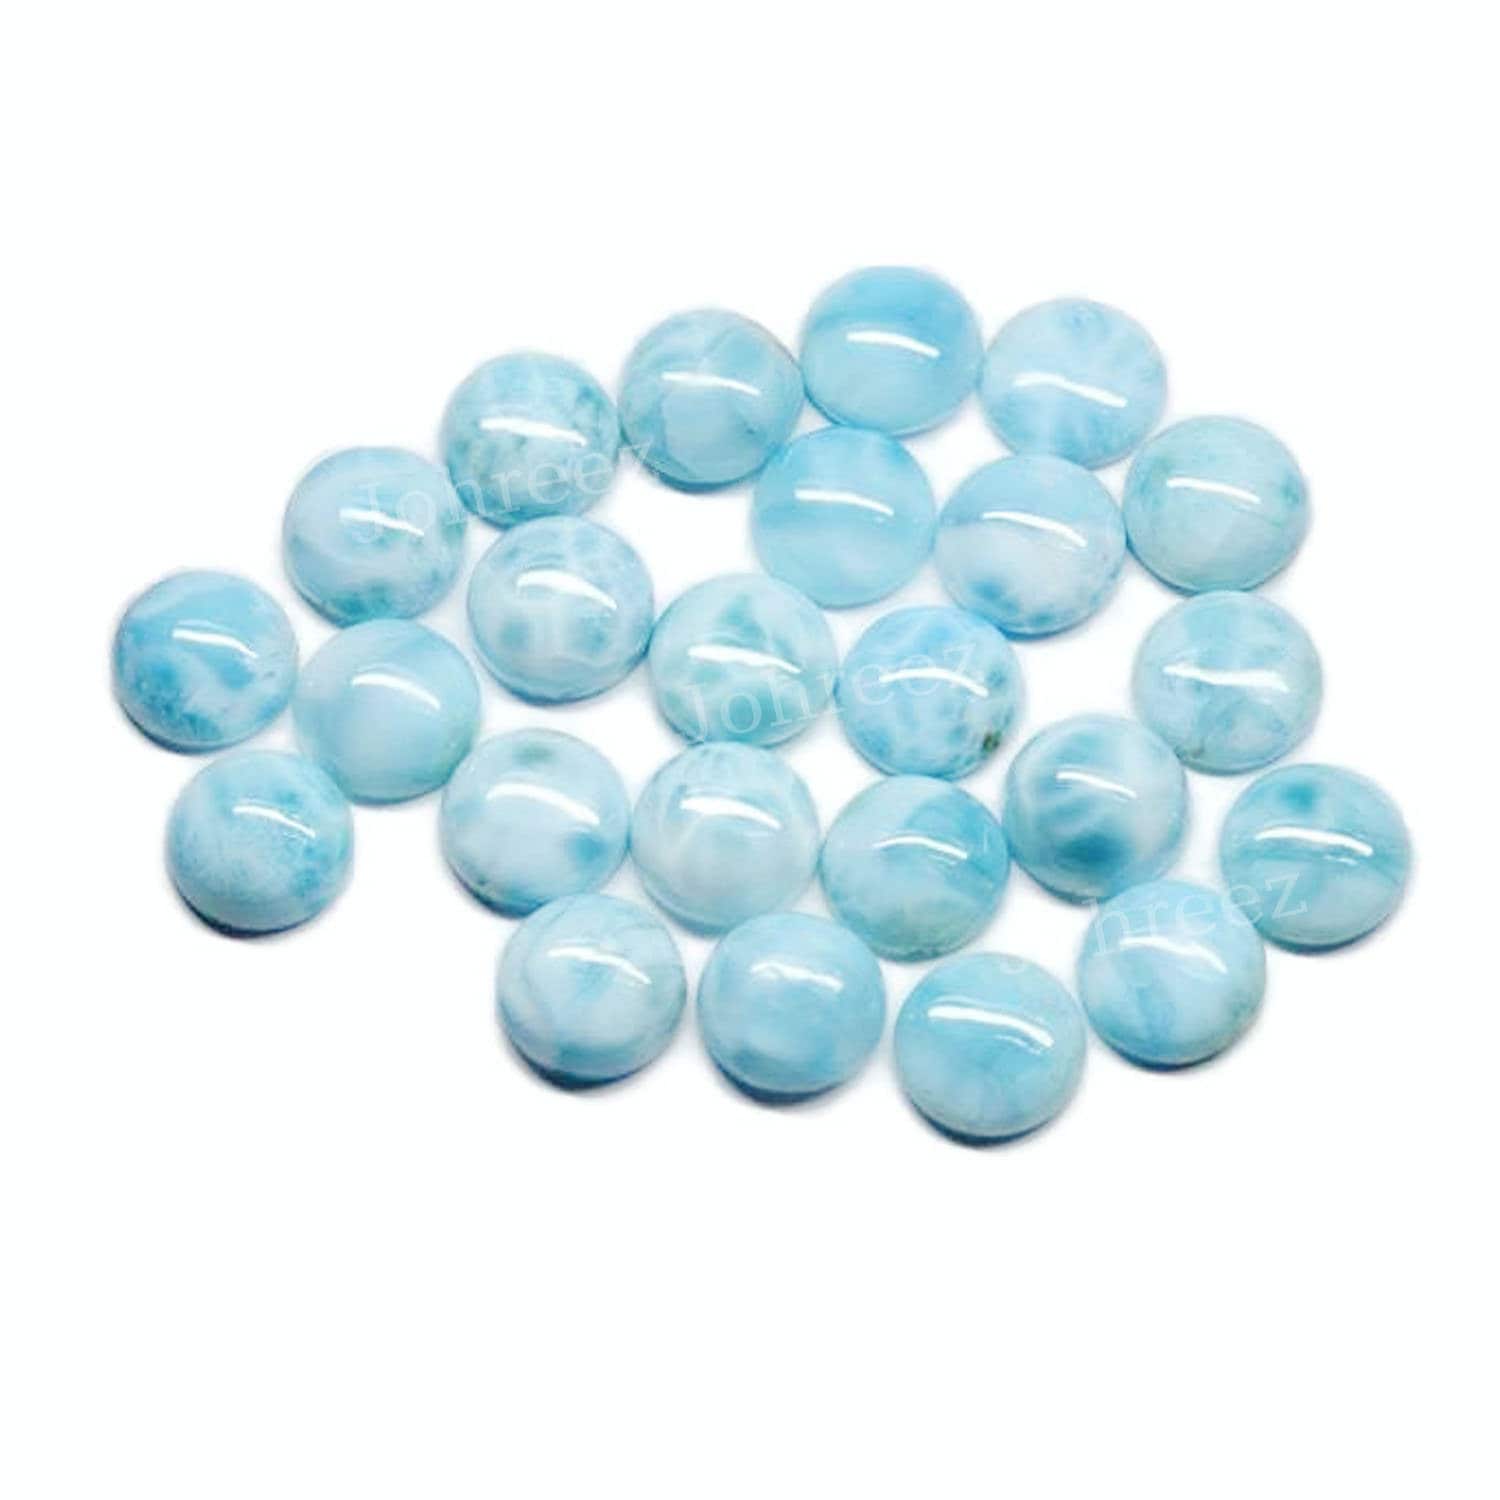 Natural Larimar Cabochon Round Shape Loose Gemstone Size 3mm To 15mm